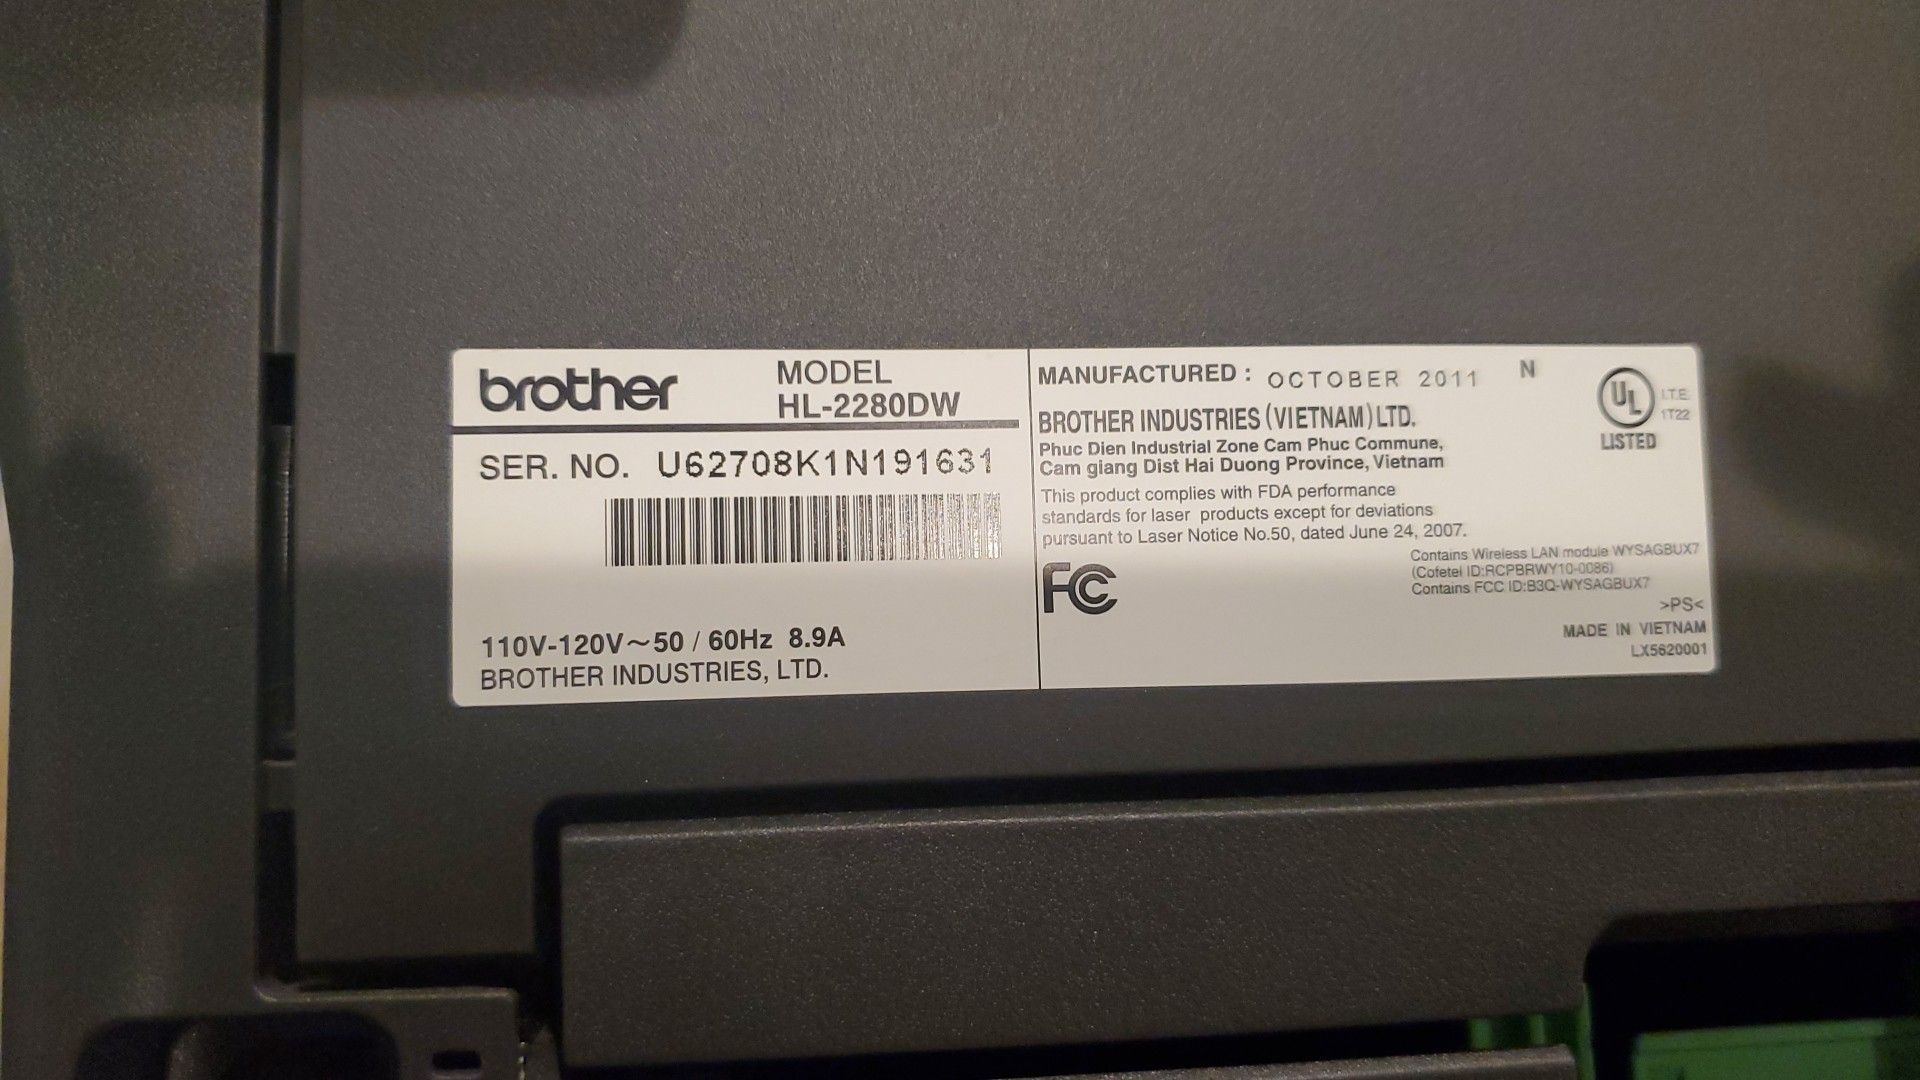 Brother all-in-one laser printer/scanner/copier. Requires new cartridge